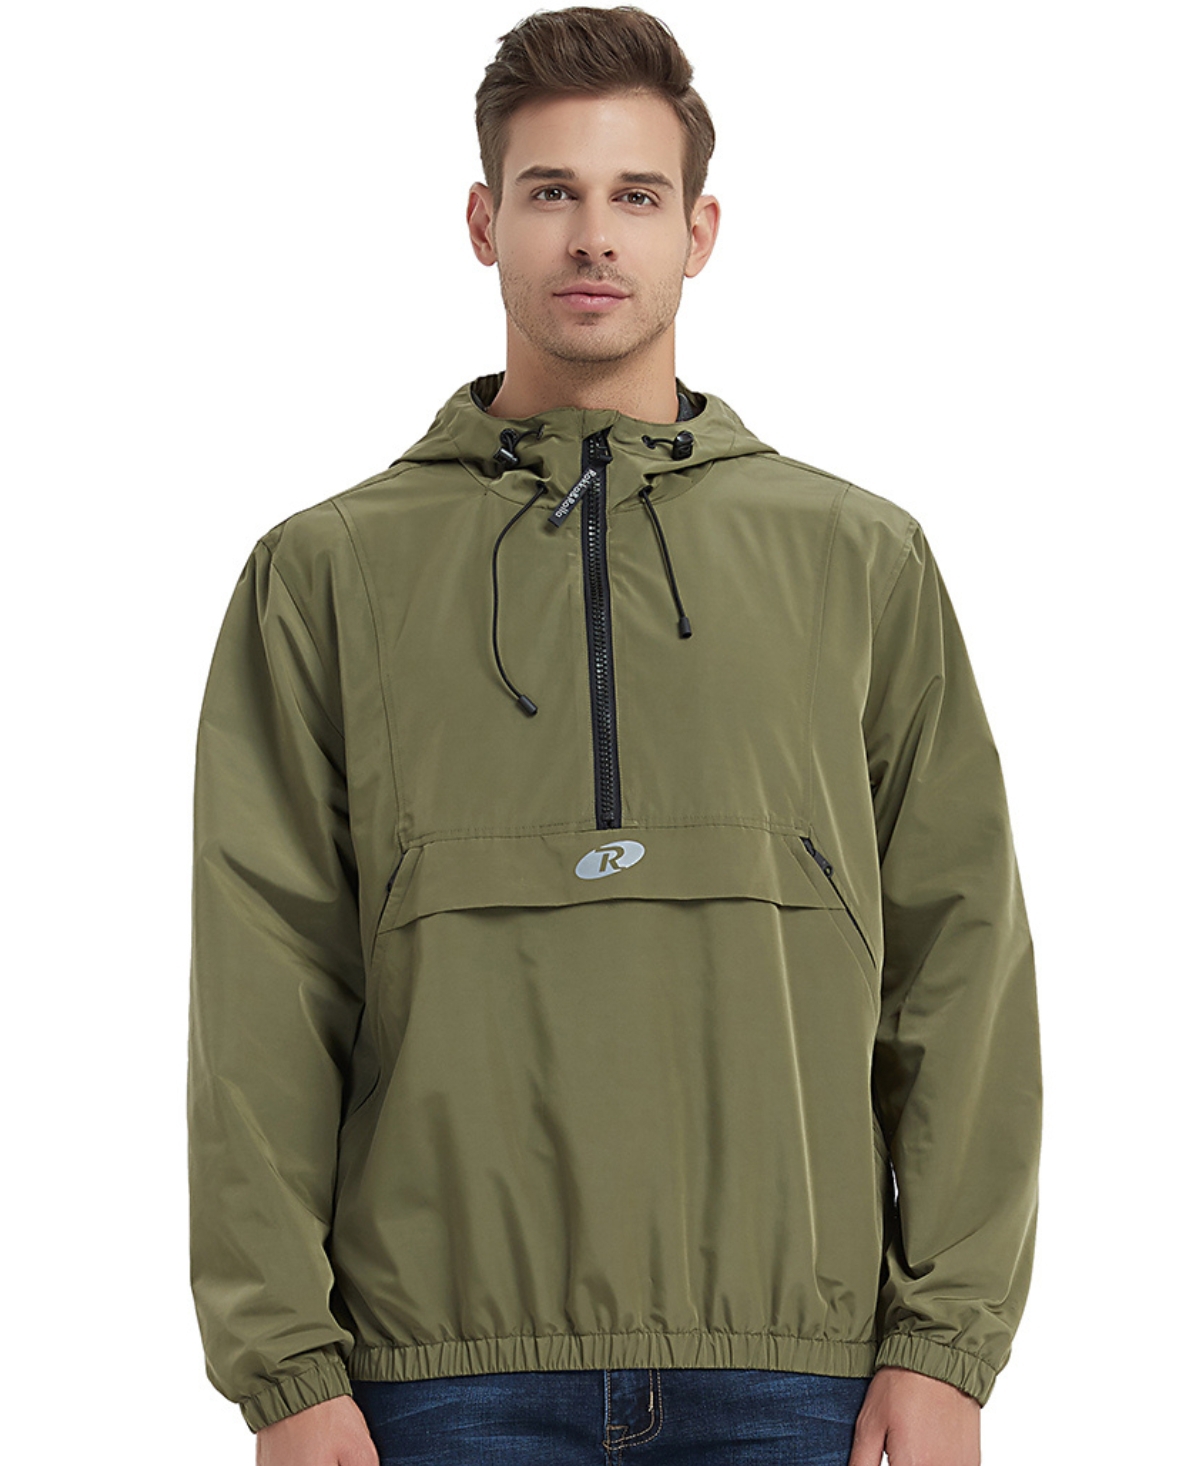 Men's Pullover Mesh lined Windbreaker Anorak Jacket, up to size 2XL - Olive green